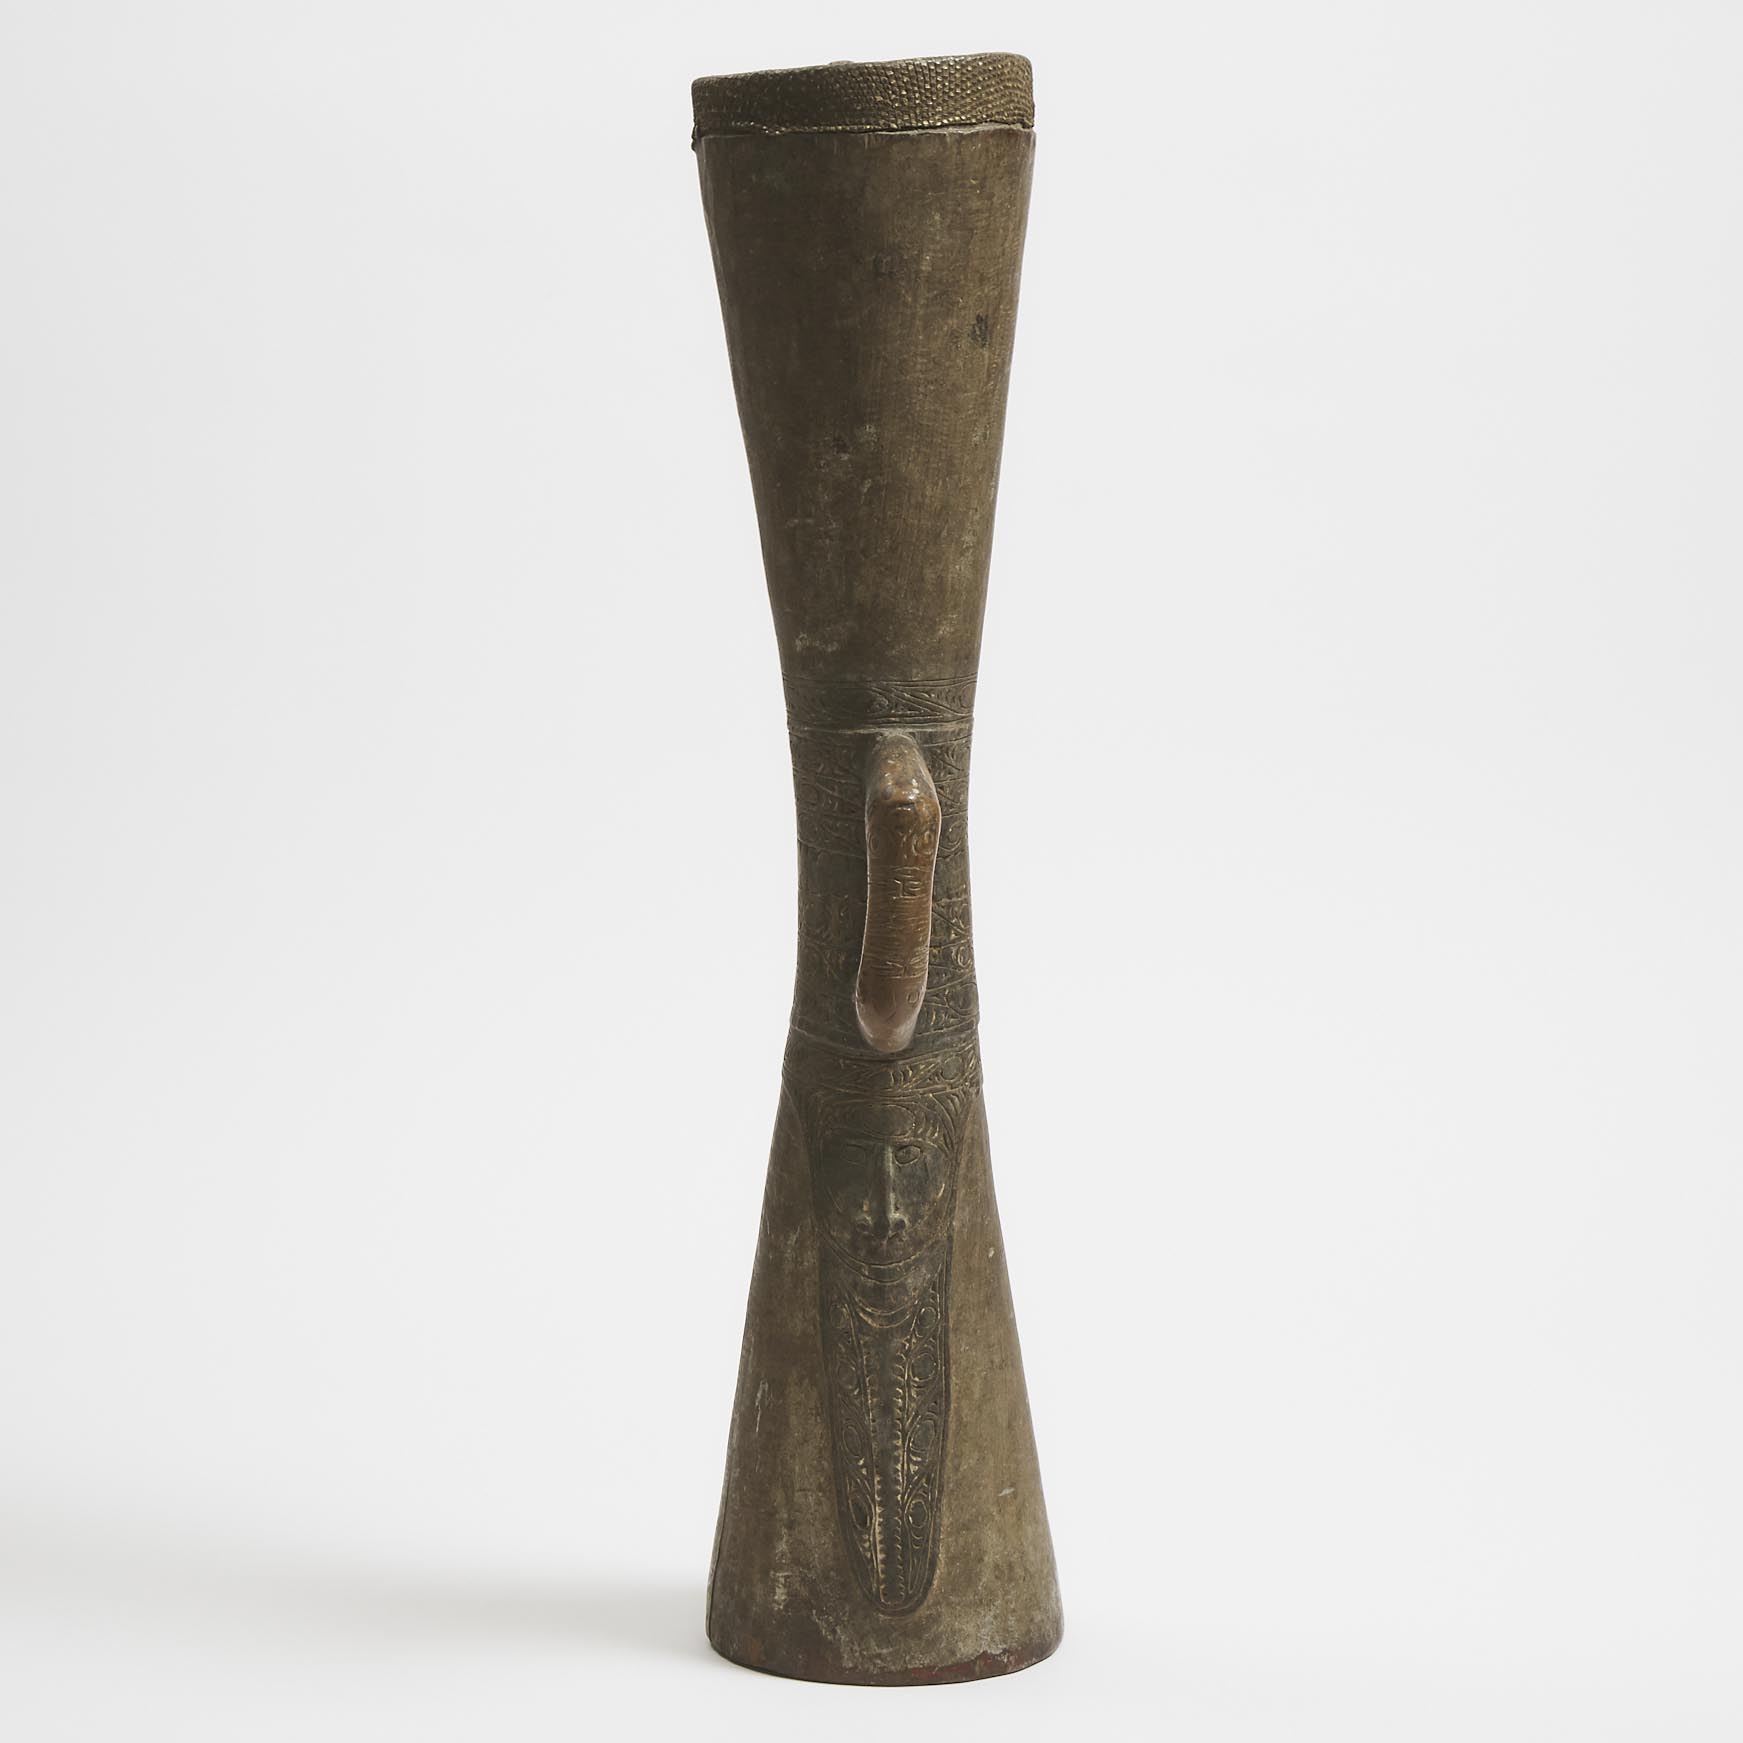 Iatmul Kundu (Drum), Middle Sepik River, Papua New Guinea, early to mid 20th century